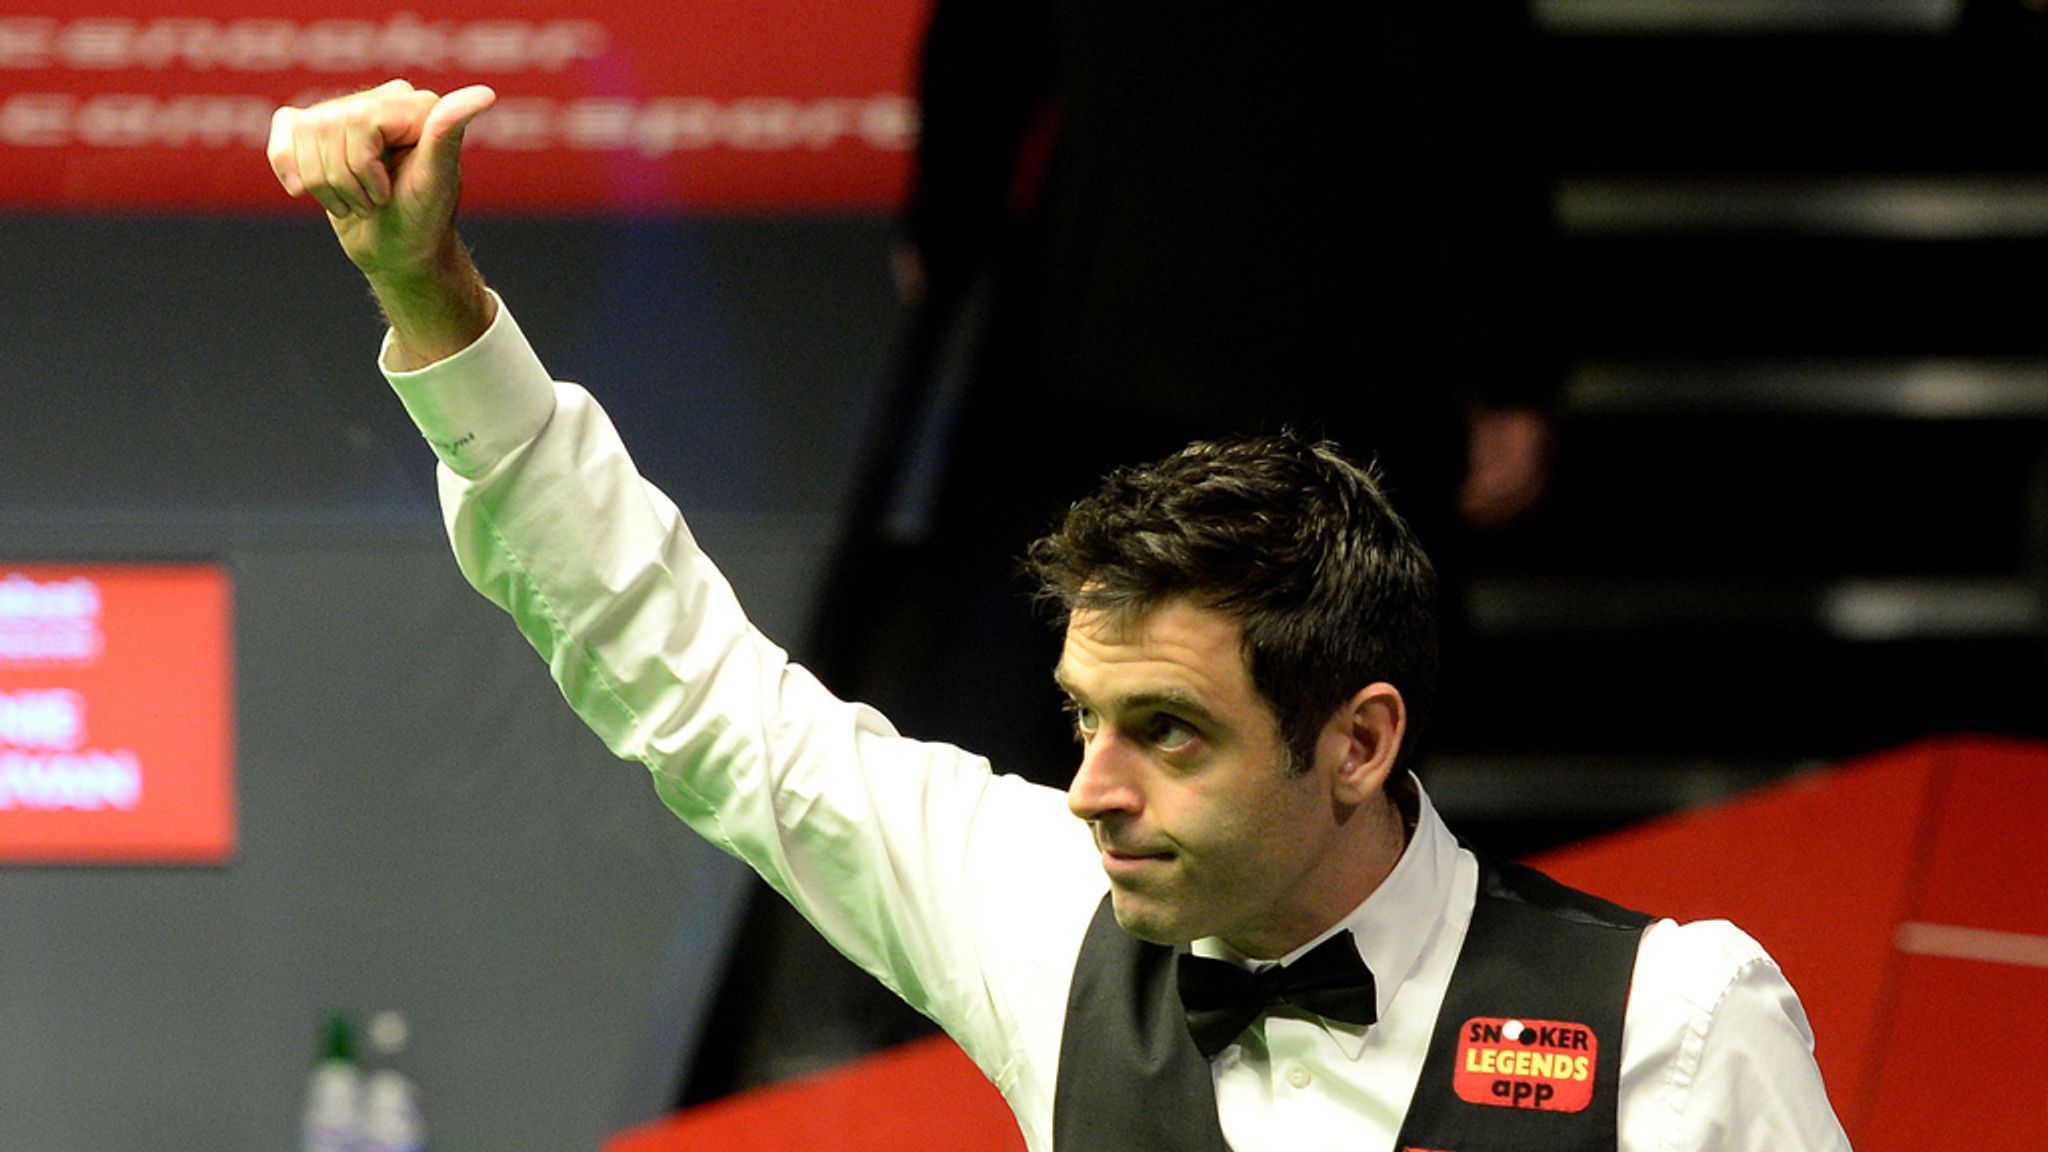 Ronnie OSullivan stages comeback win at Shanghai Masters Snooker News Sky Sports